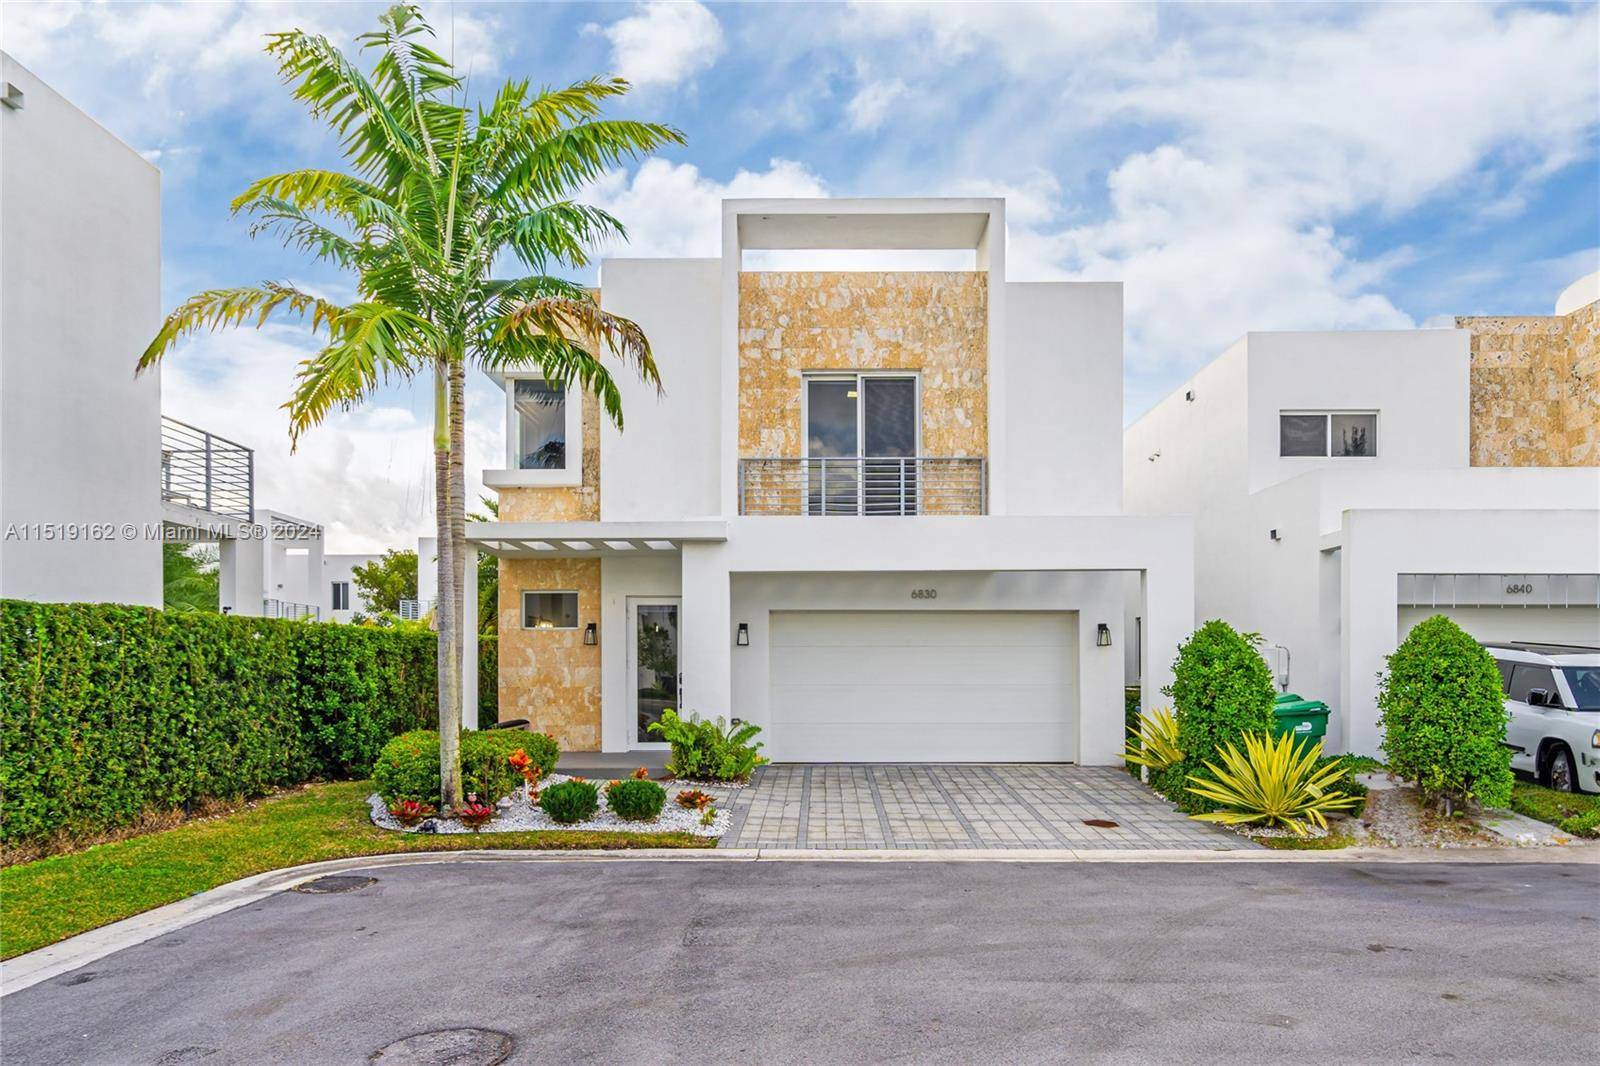 Gorgeous single family house in a modern and gated community Neovita, with a lot of lighting and open layout, elegant kitchen with stainless steel appliances and quartz countertop, porcelain tile ...